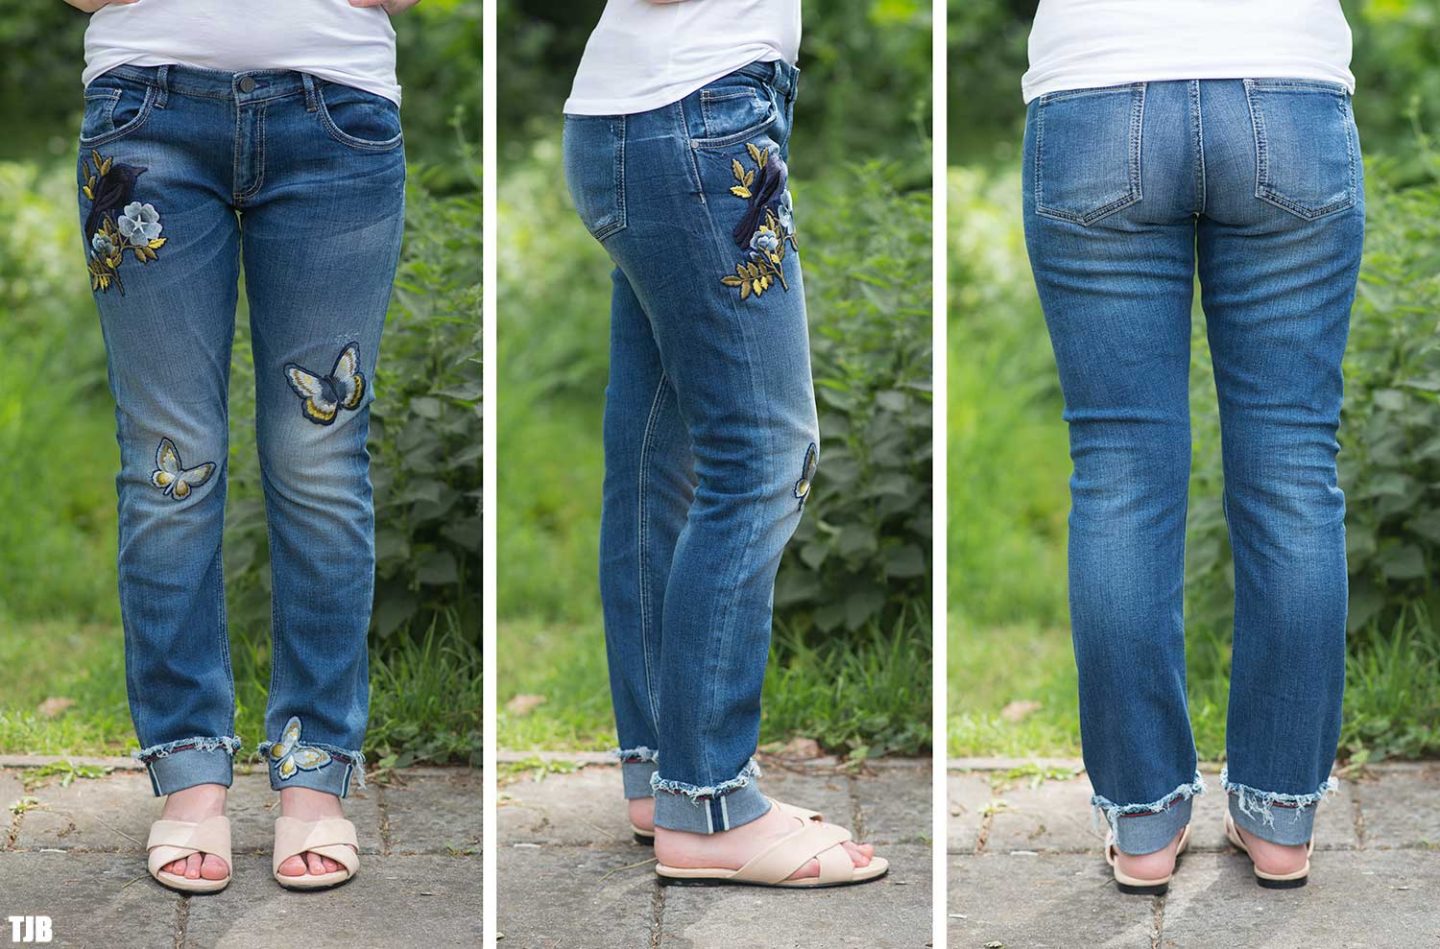 ONE DENIM Women’s Embroidered Jeans & Shorts Review - THE JEANS BLOG